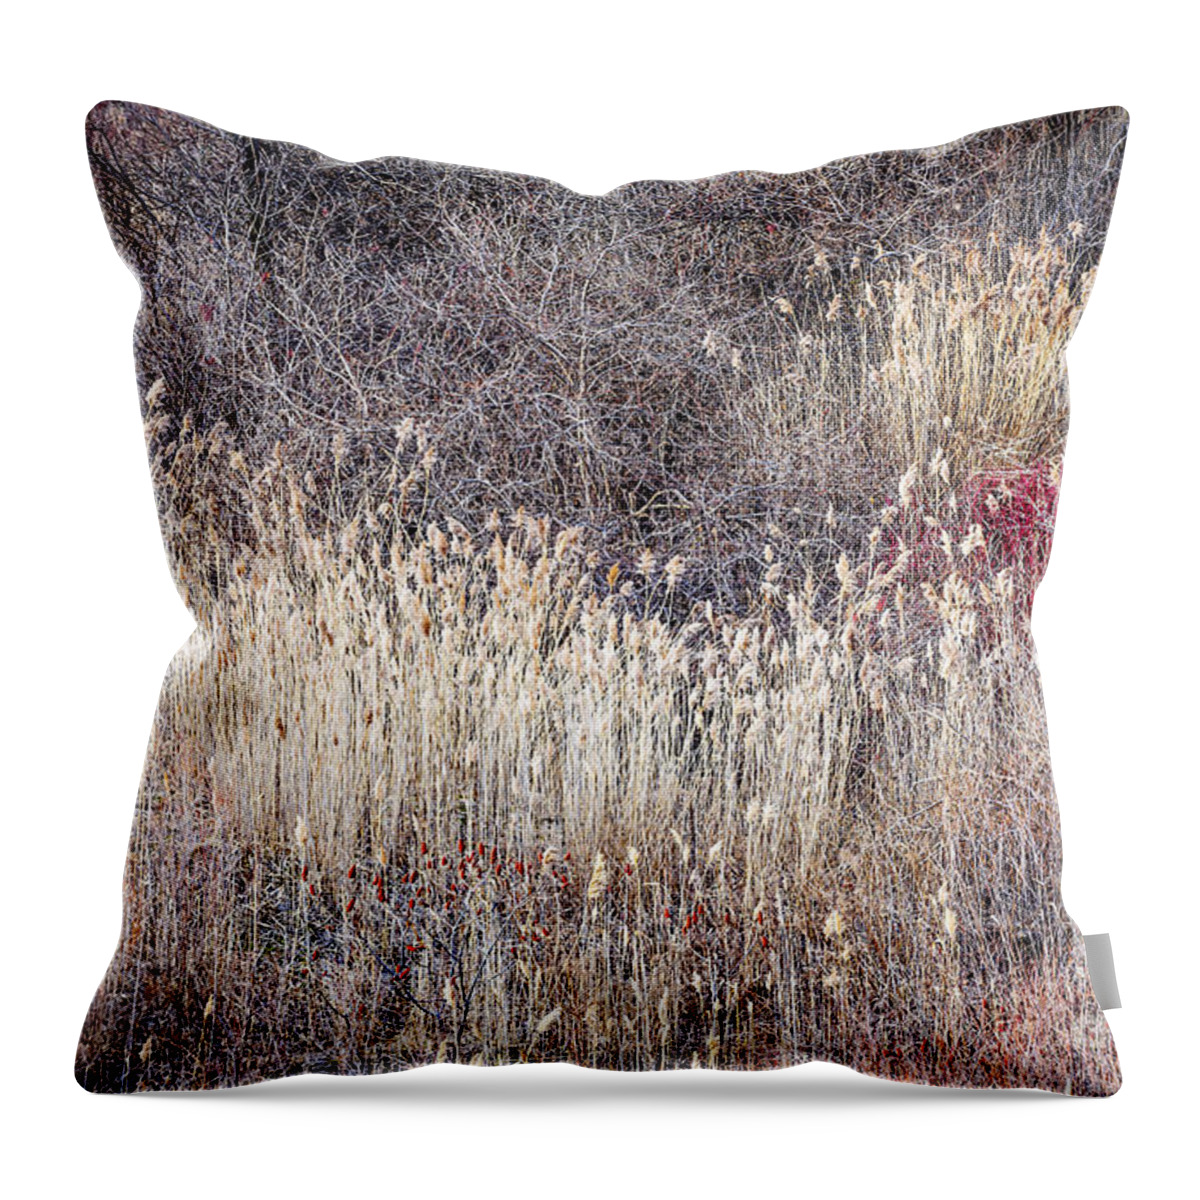 Grasses Throw Pillow featuring the photograph Dry grasses and bare trees in winter forest by Elena Elisseeva